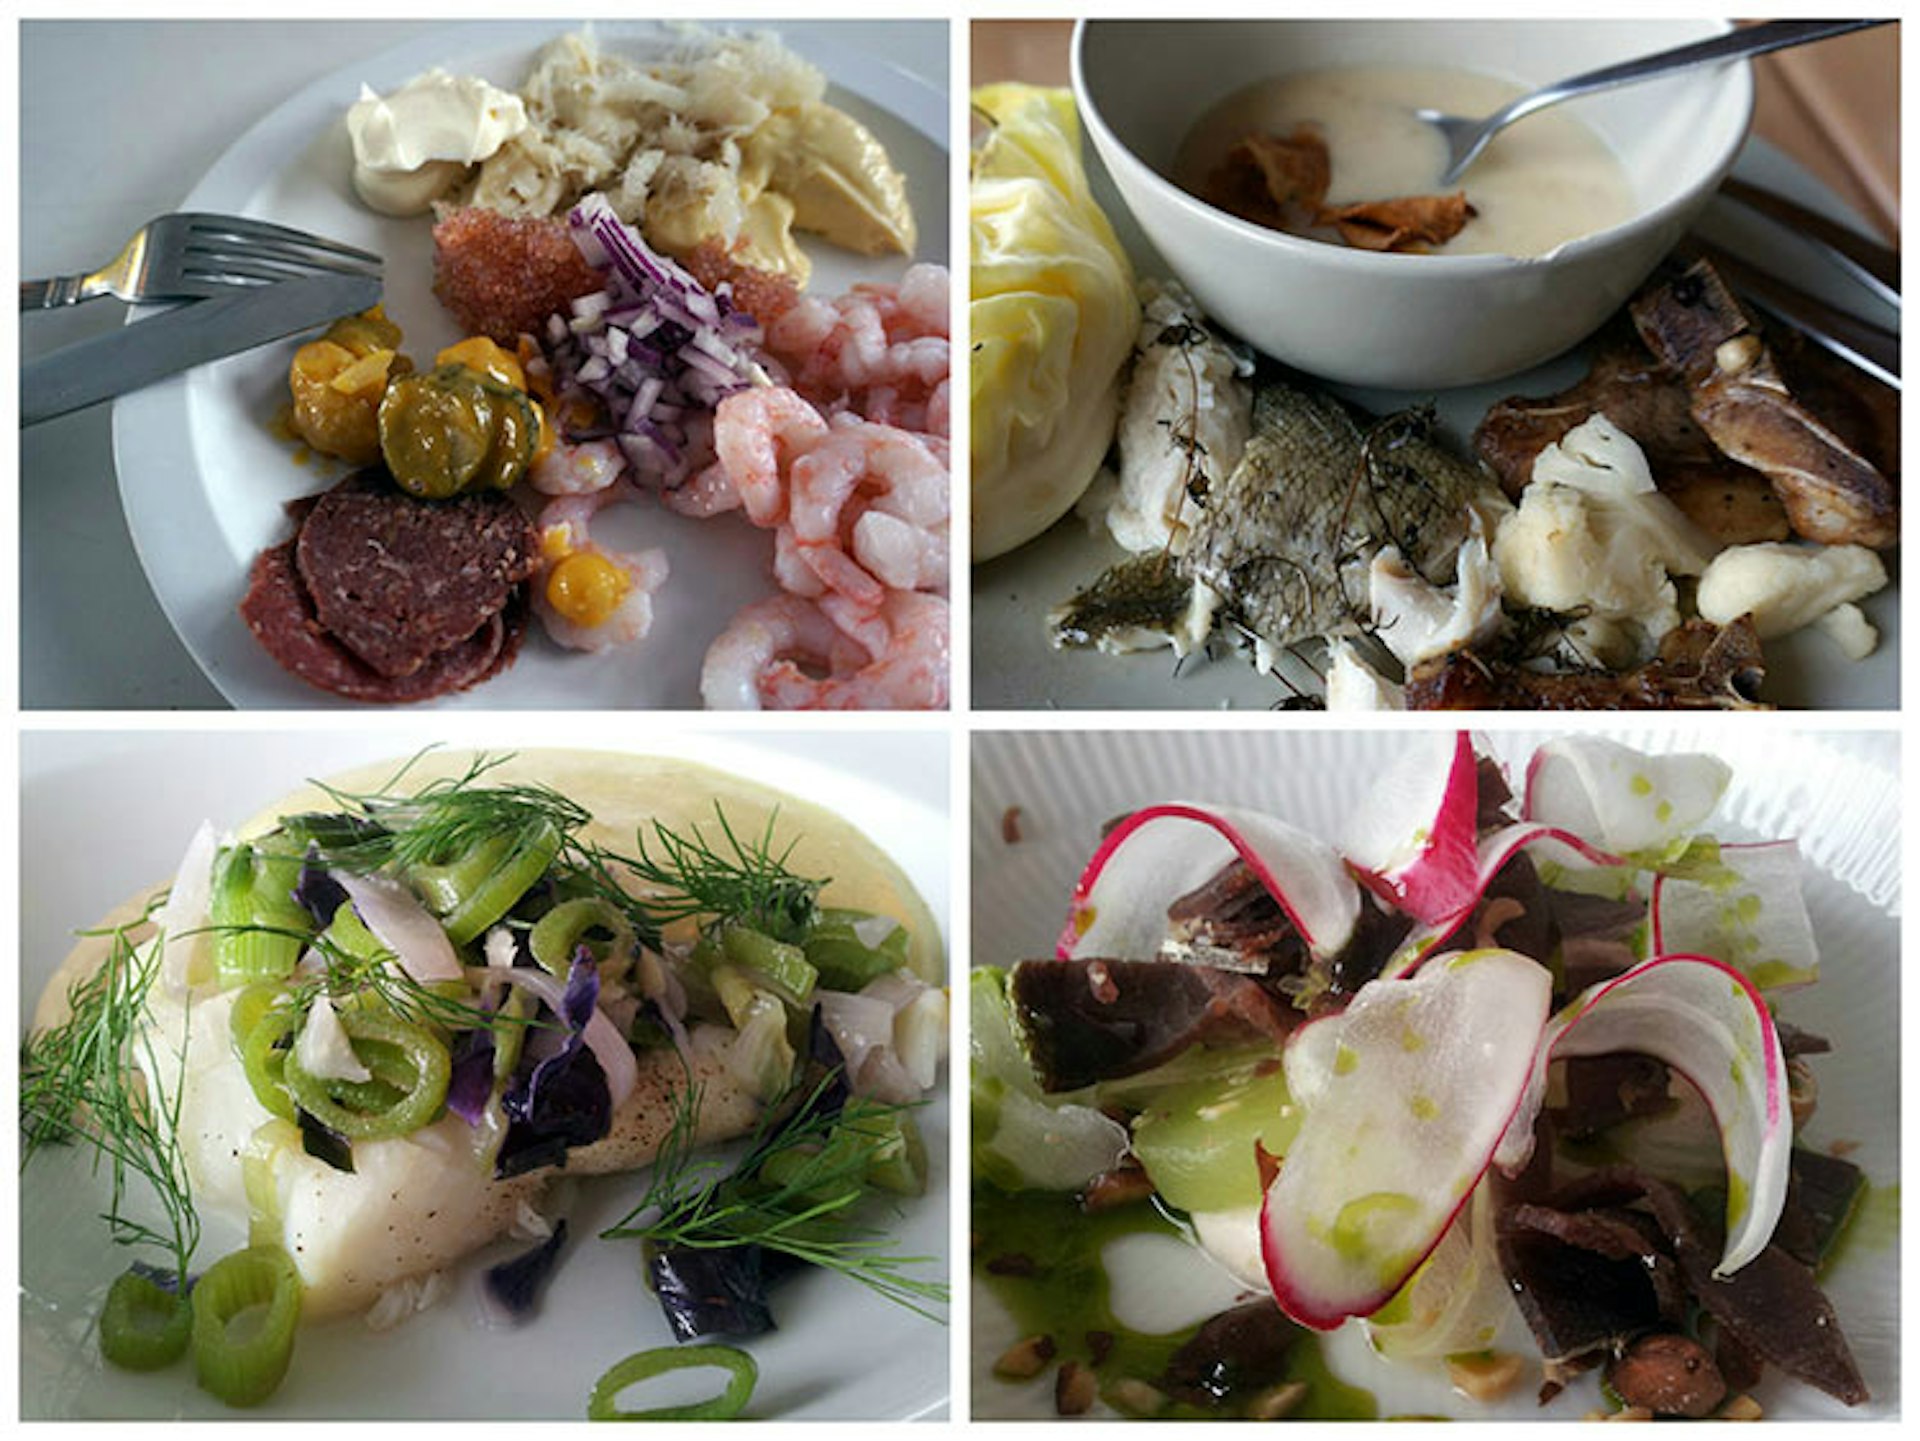 Four images showing plates of seafood, shrimp, soups, dried muskox meat and fish decorated with onion and angelica root.